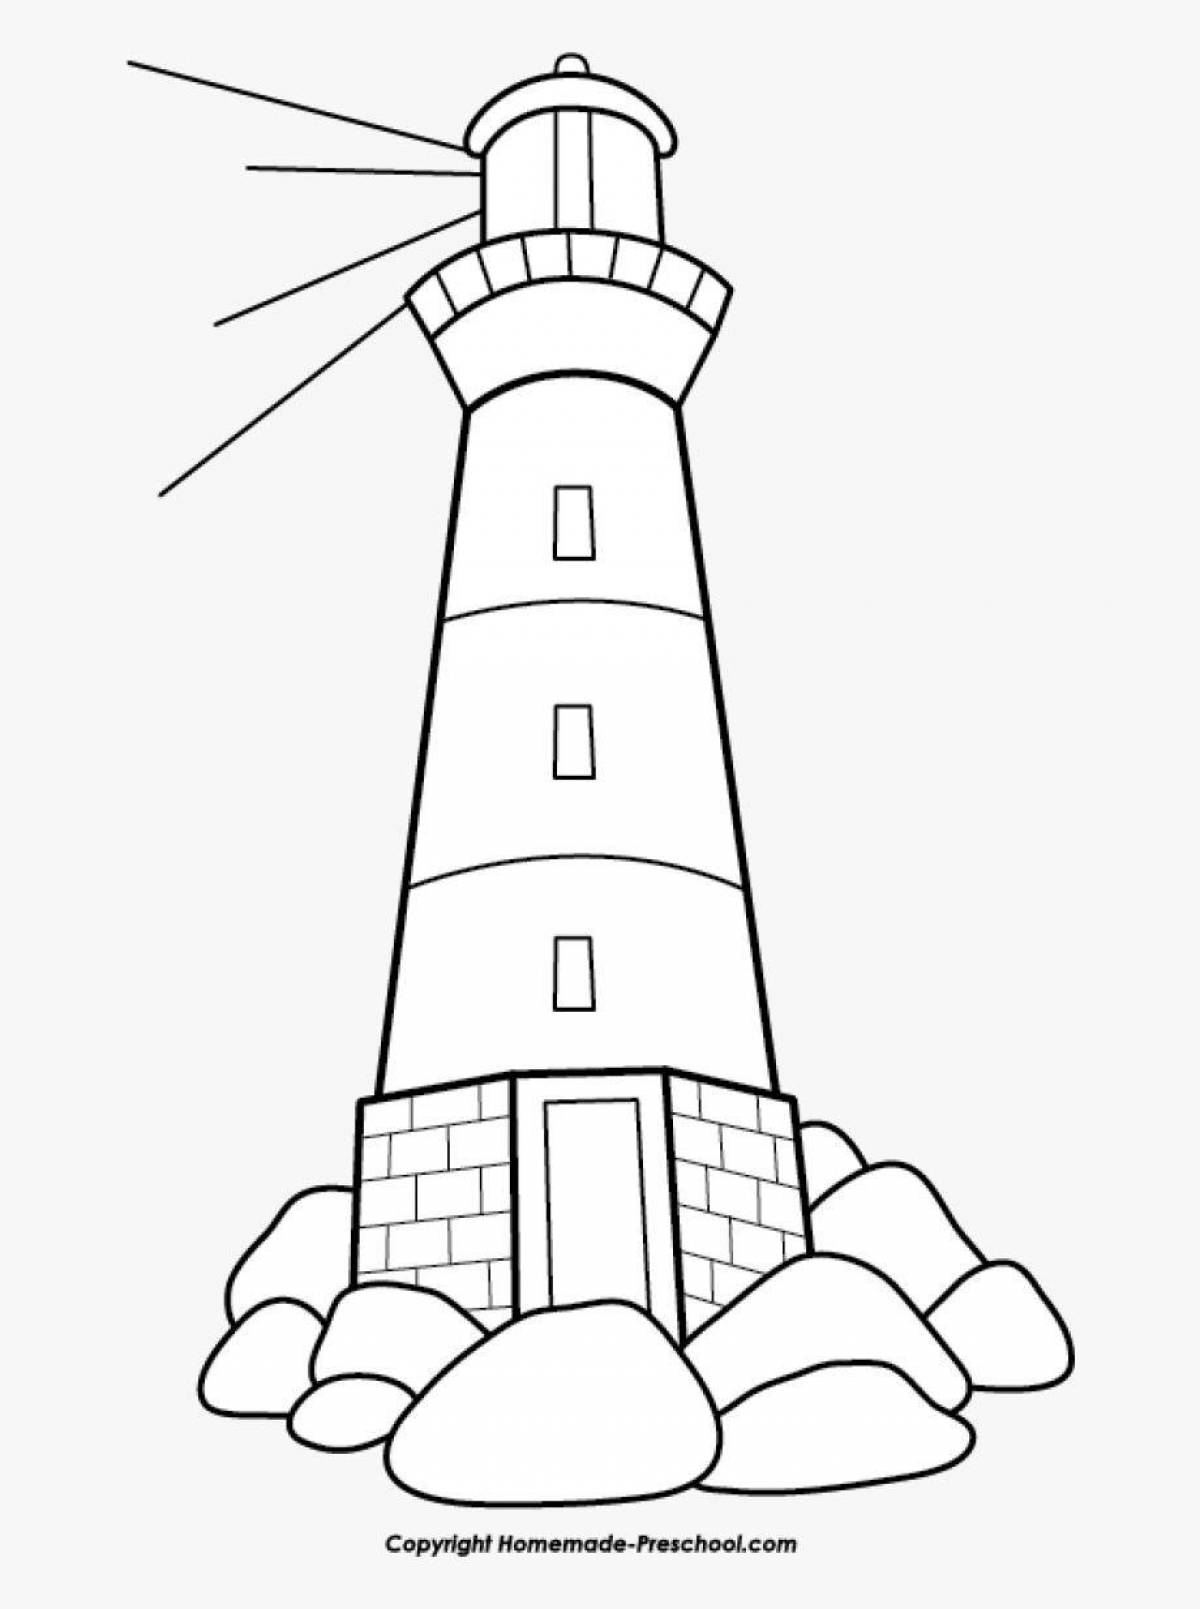 Shining lighthouse coloring book for kids